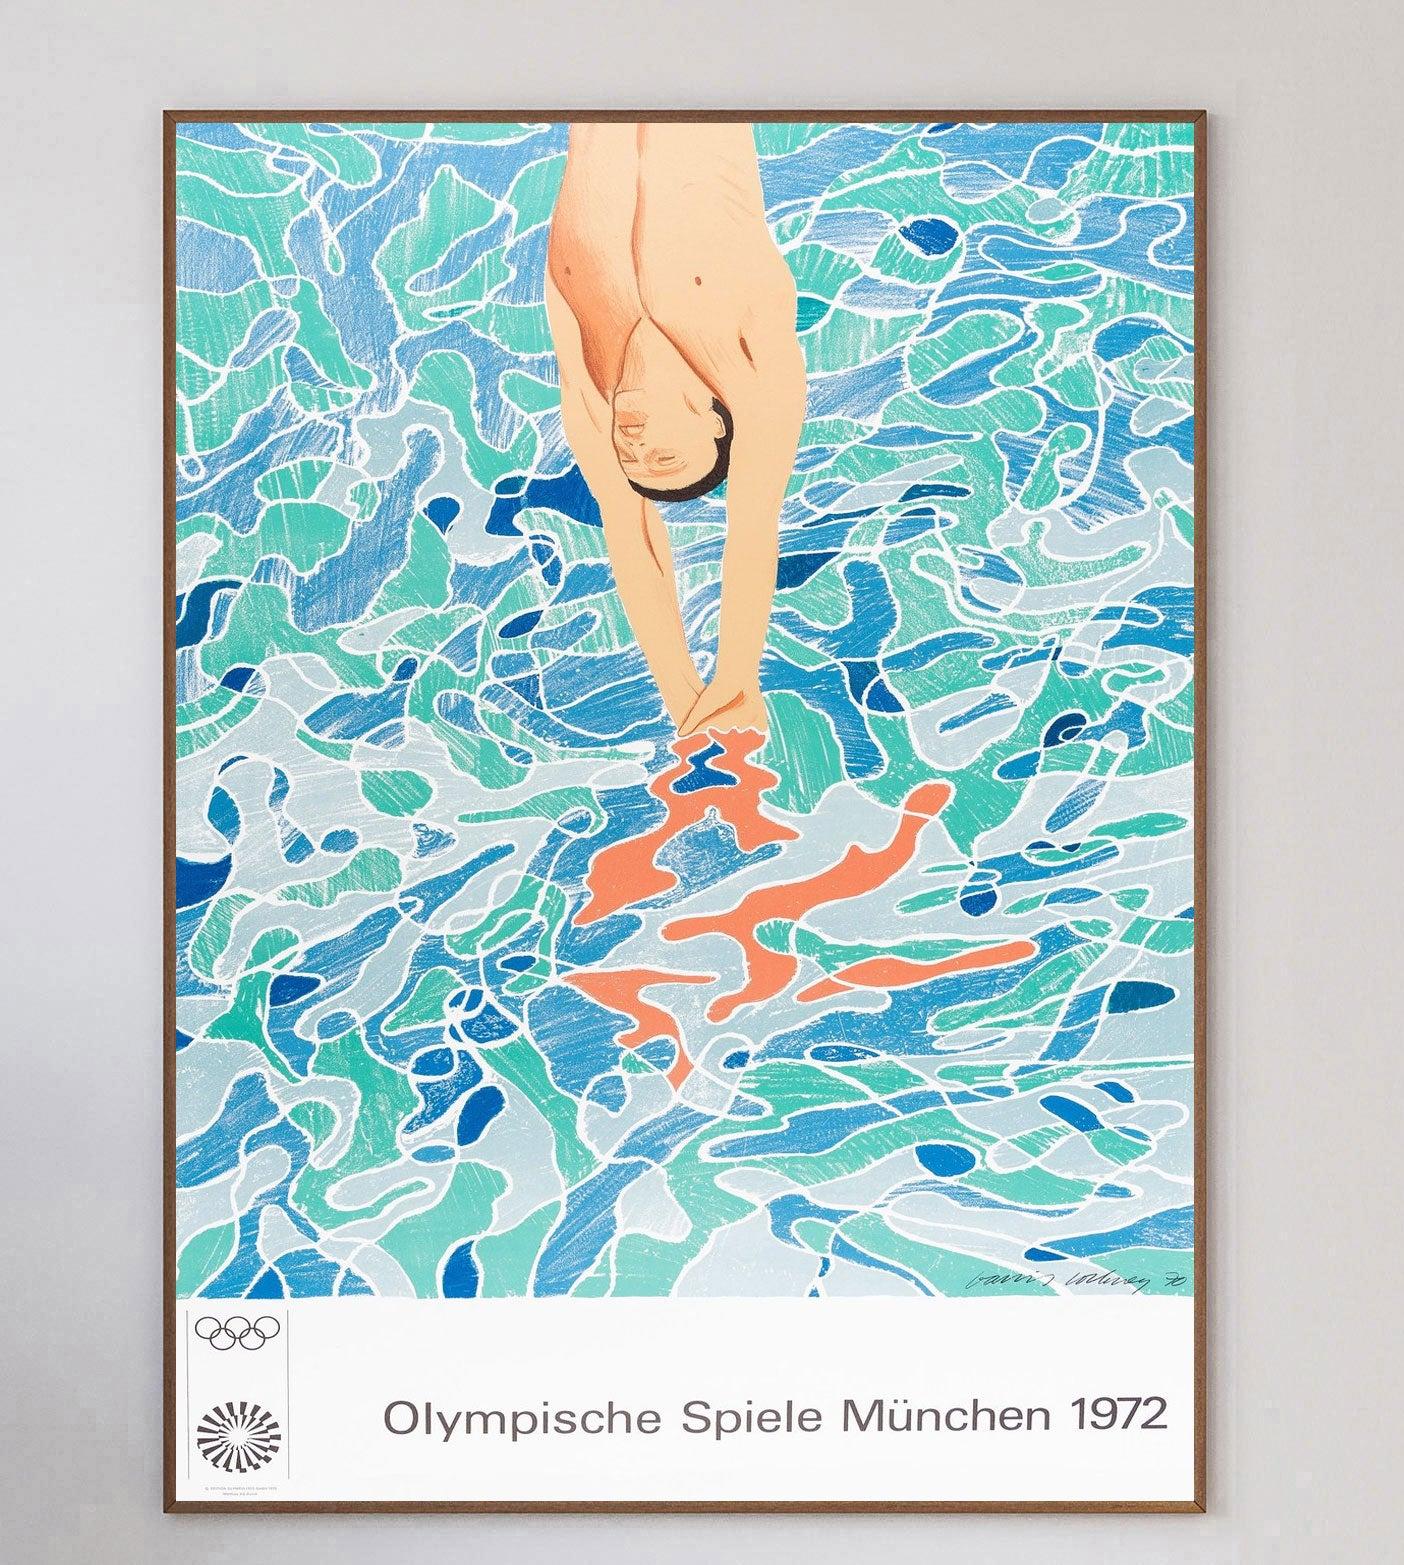 Celebrated British artist David Hockney was one of 29 artists commissioned to produce posters for the 1972 Munich Olympic Games. In the run-up to the 1972 Games, the Organising Committee decided to commission a series of Artist Posters to 